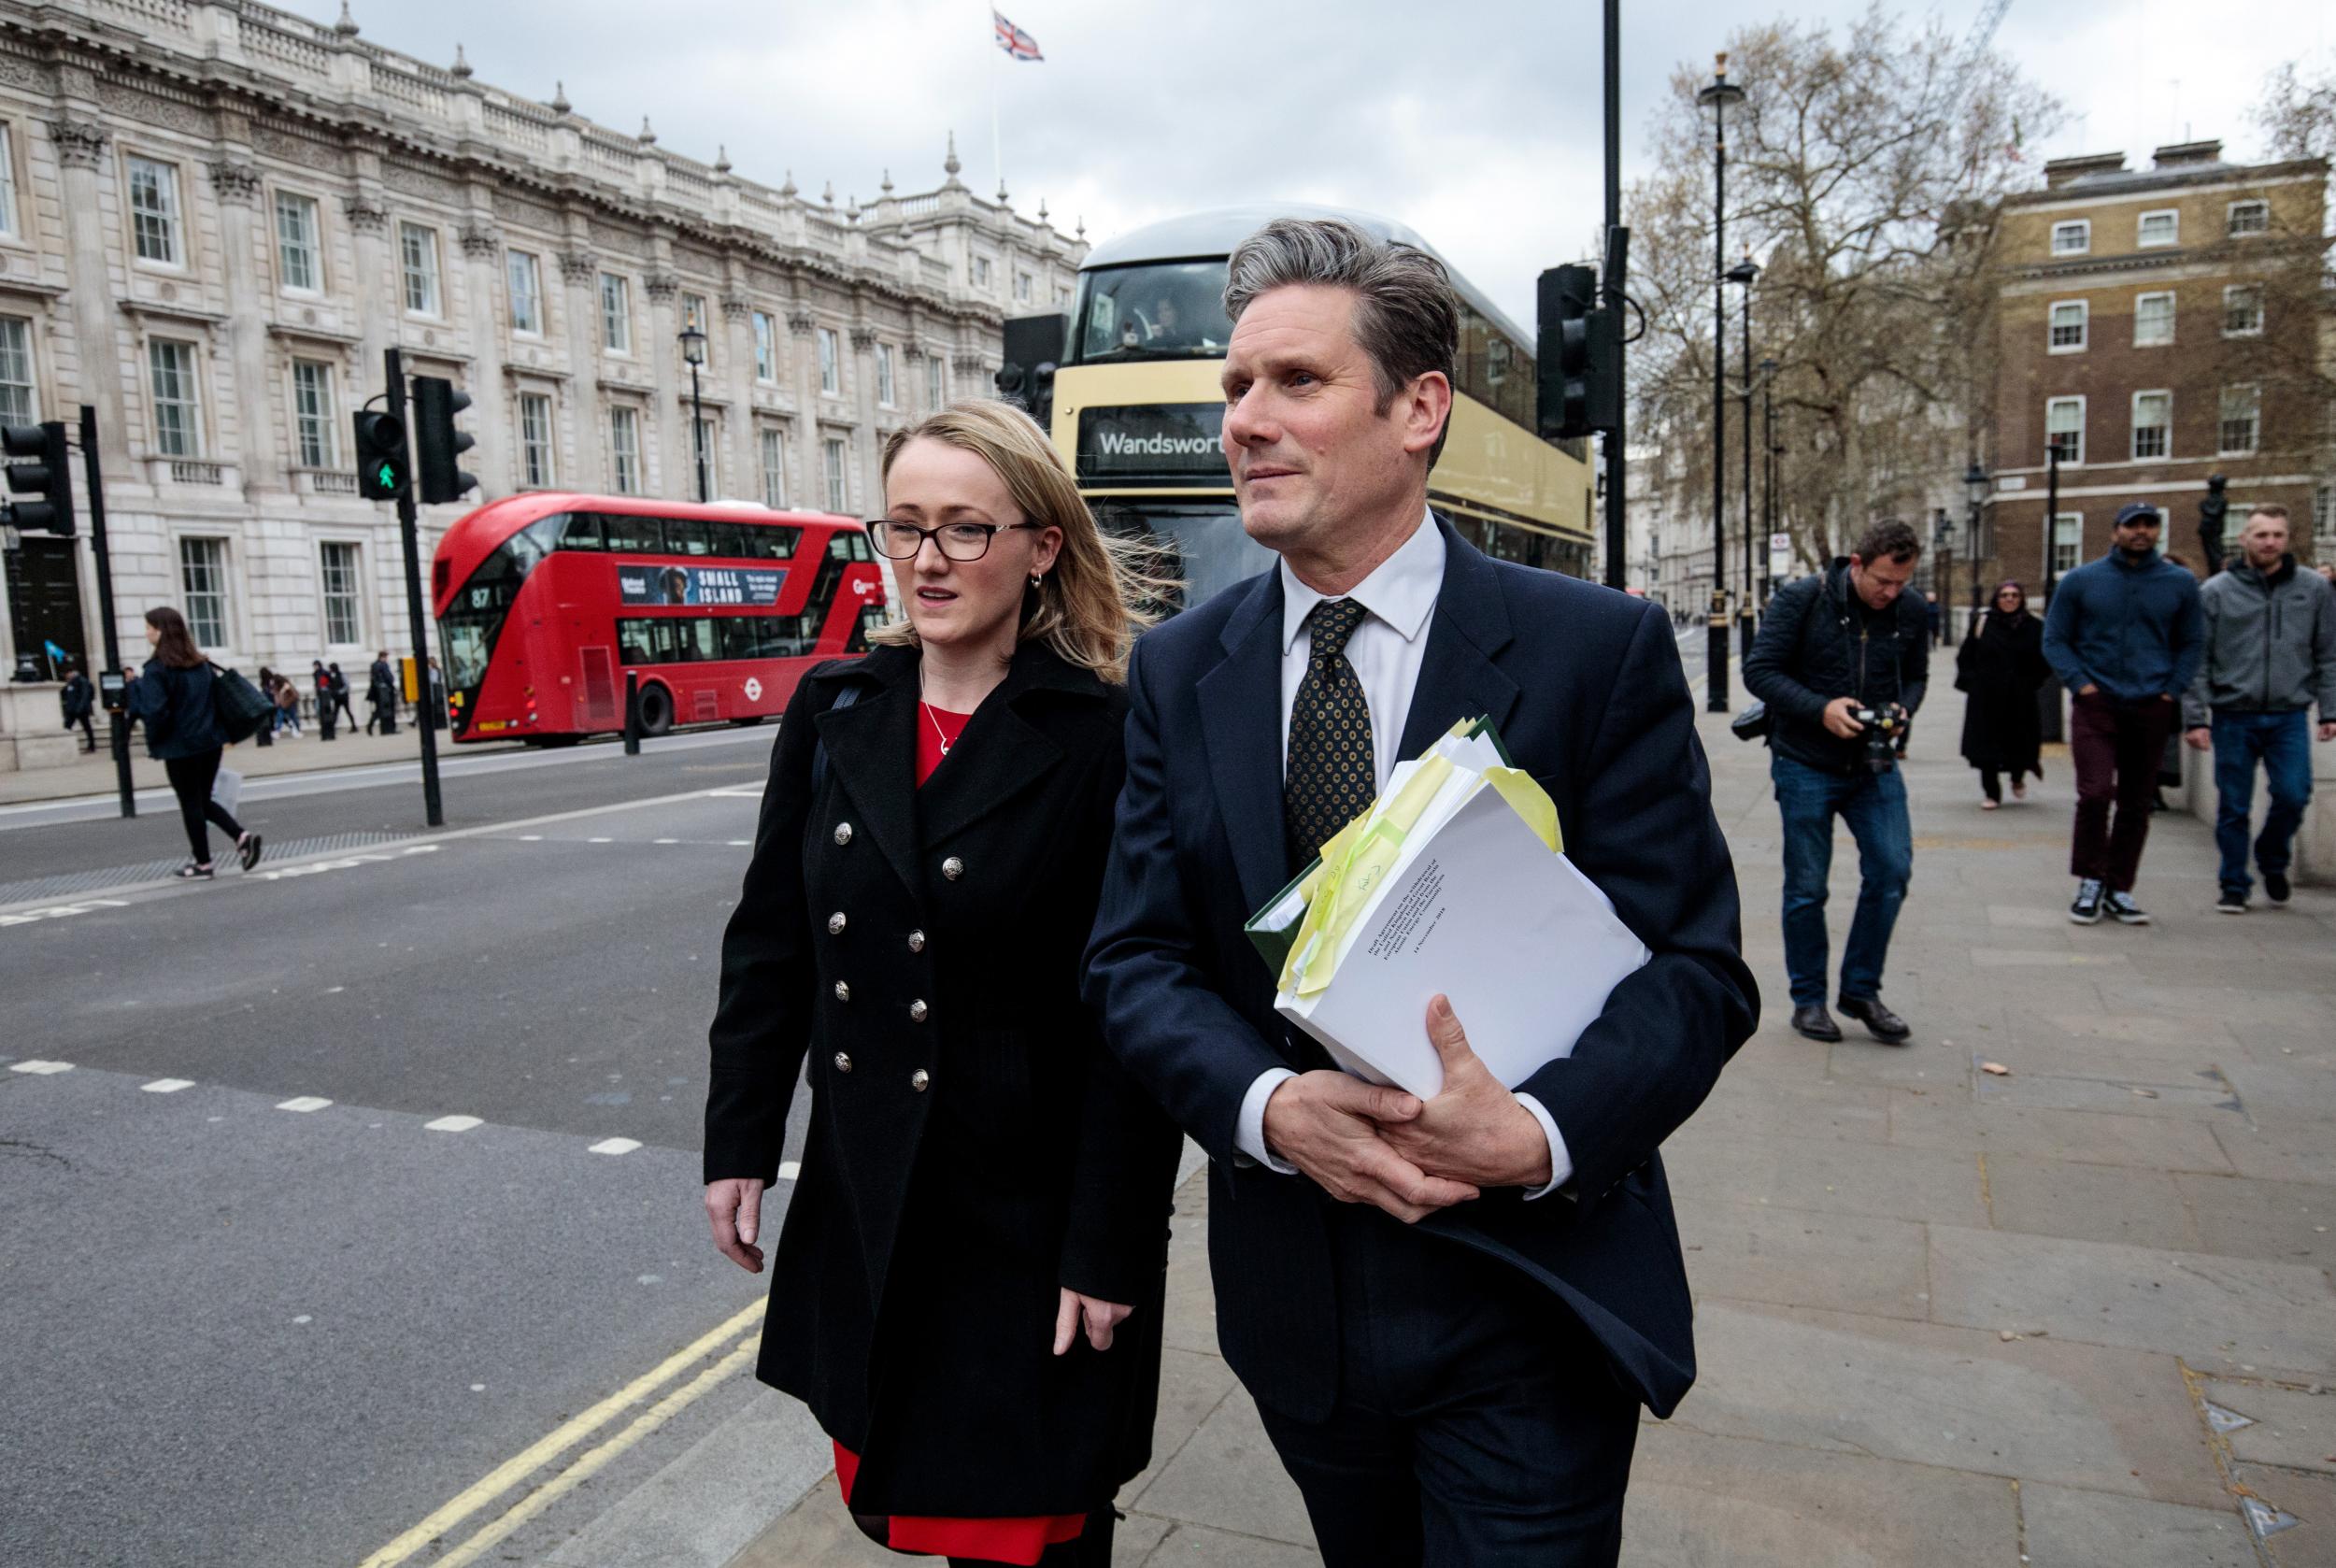 Labour’s Keir Starmer and Rebecca Long-Bailey exit cross-party Brexit talks